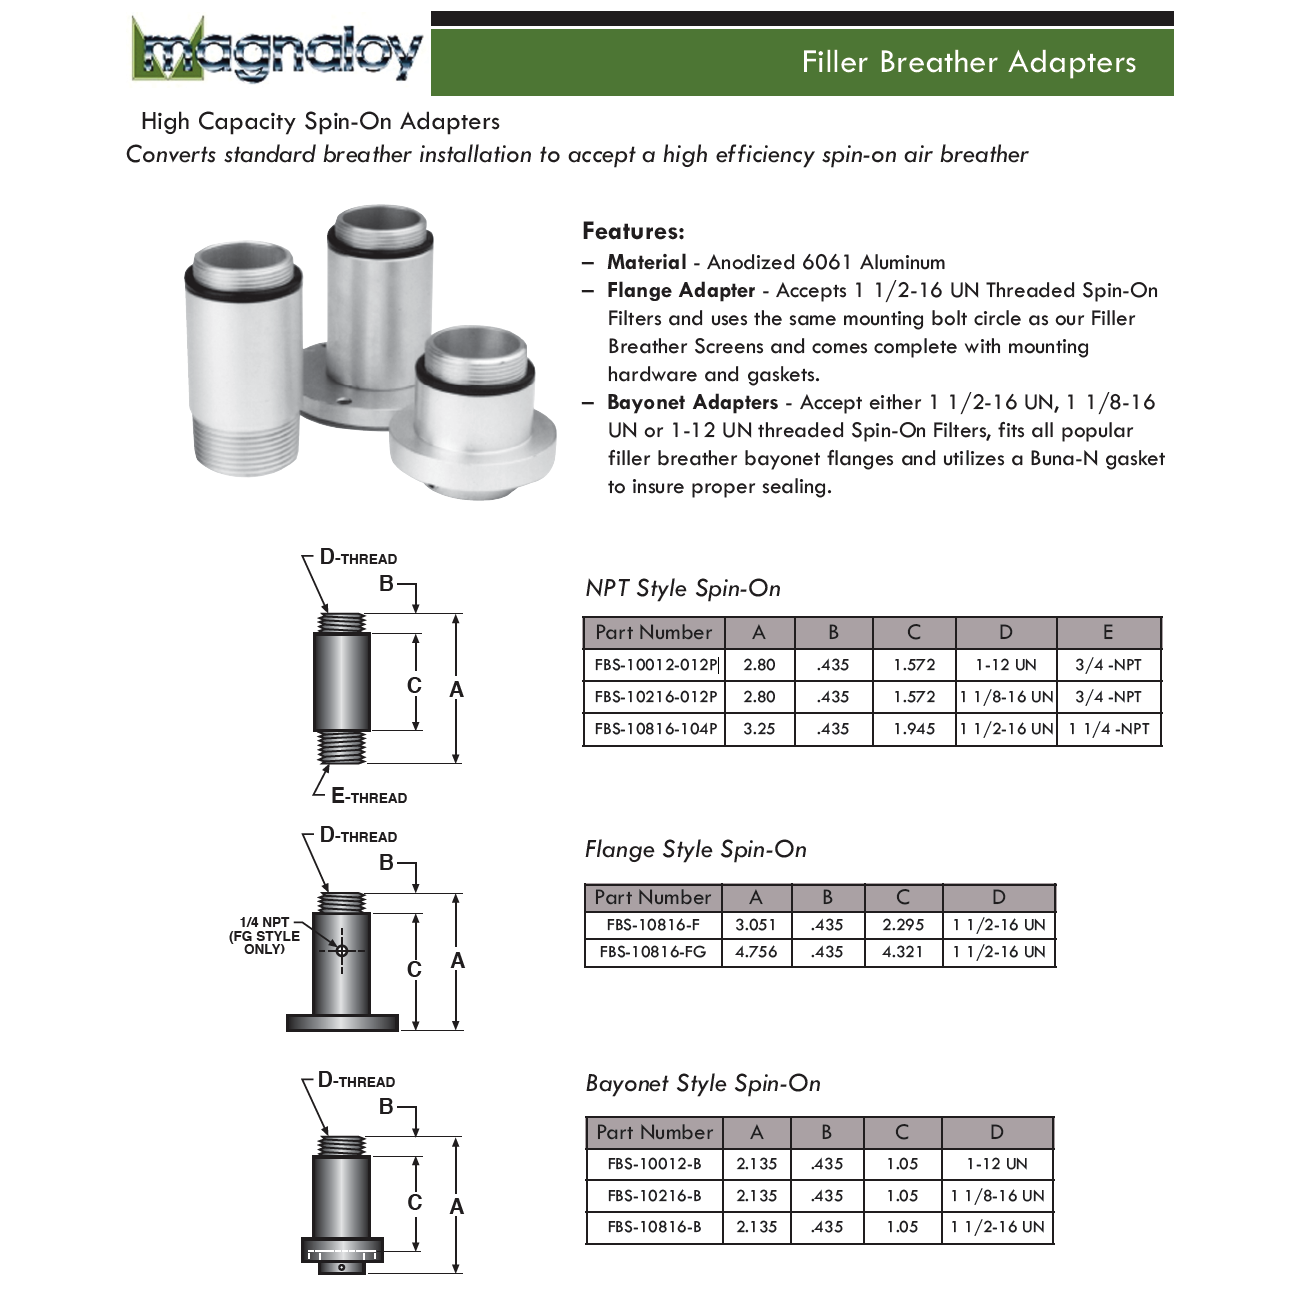 FBS-10816-F : Magnaloy Spin-On Flange Adapter, Aluminum, Flange to 1 1/2-16 UN